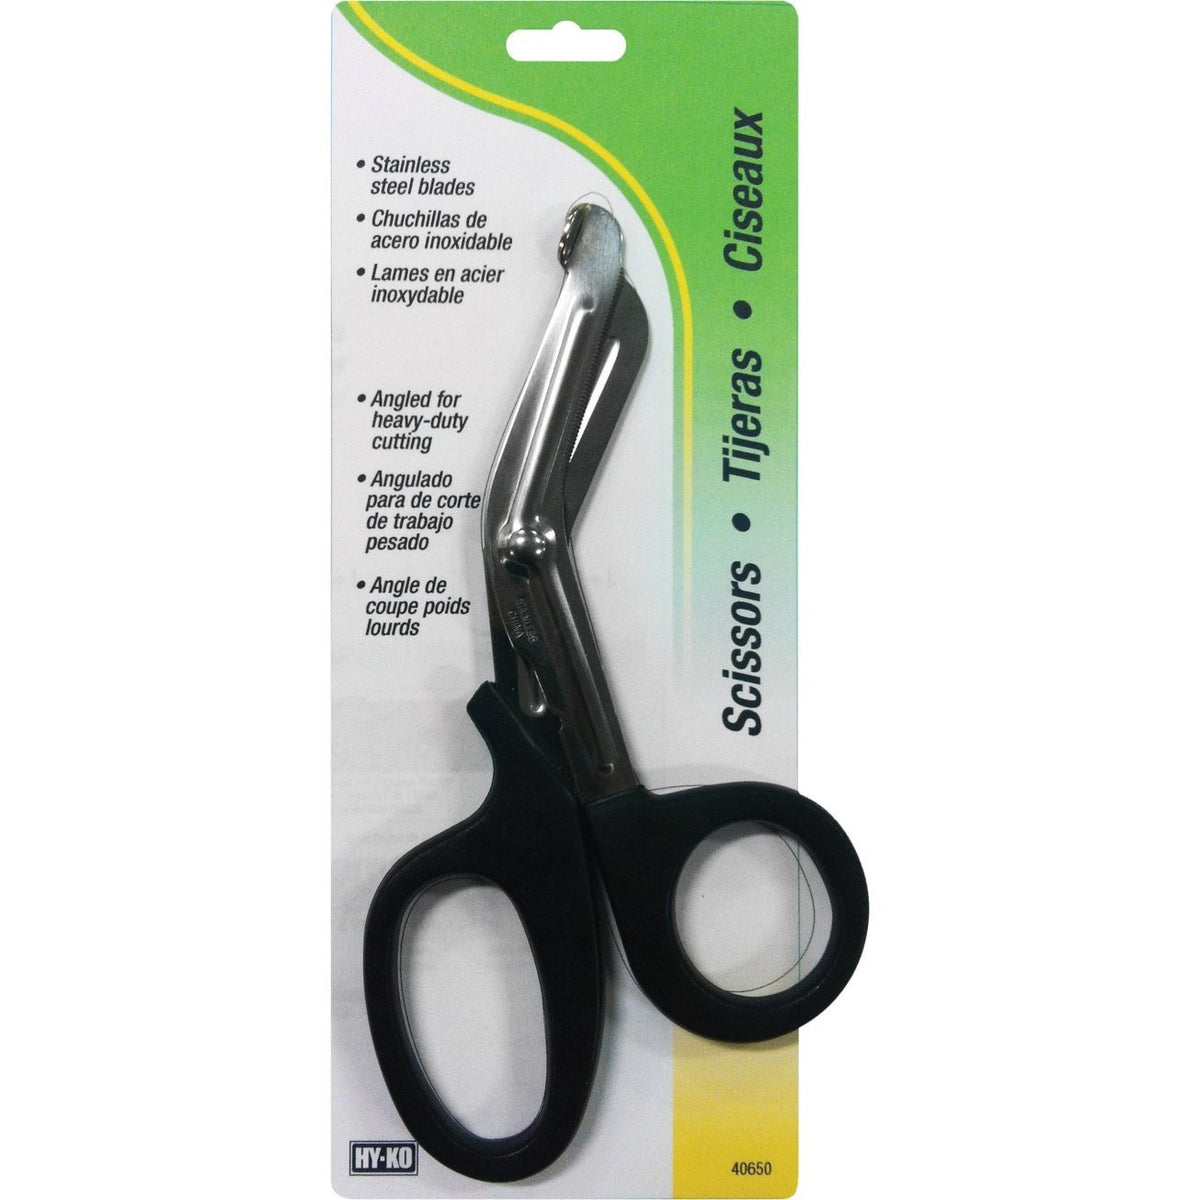 buy scissors & cutlery at cheap rate in bulk. wholesale & retail kitchen essentials store.